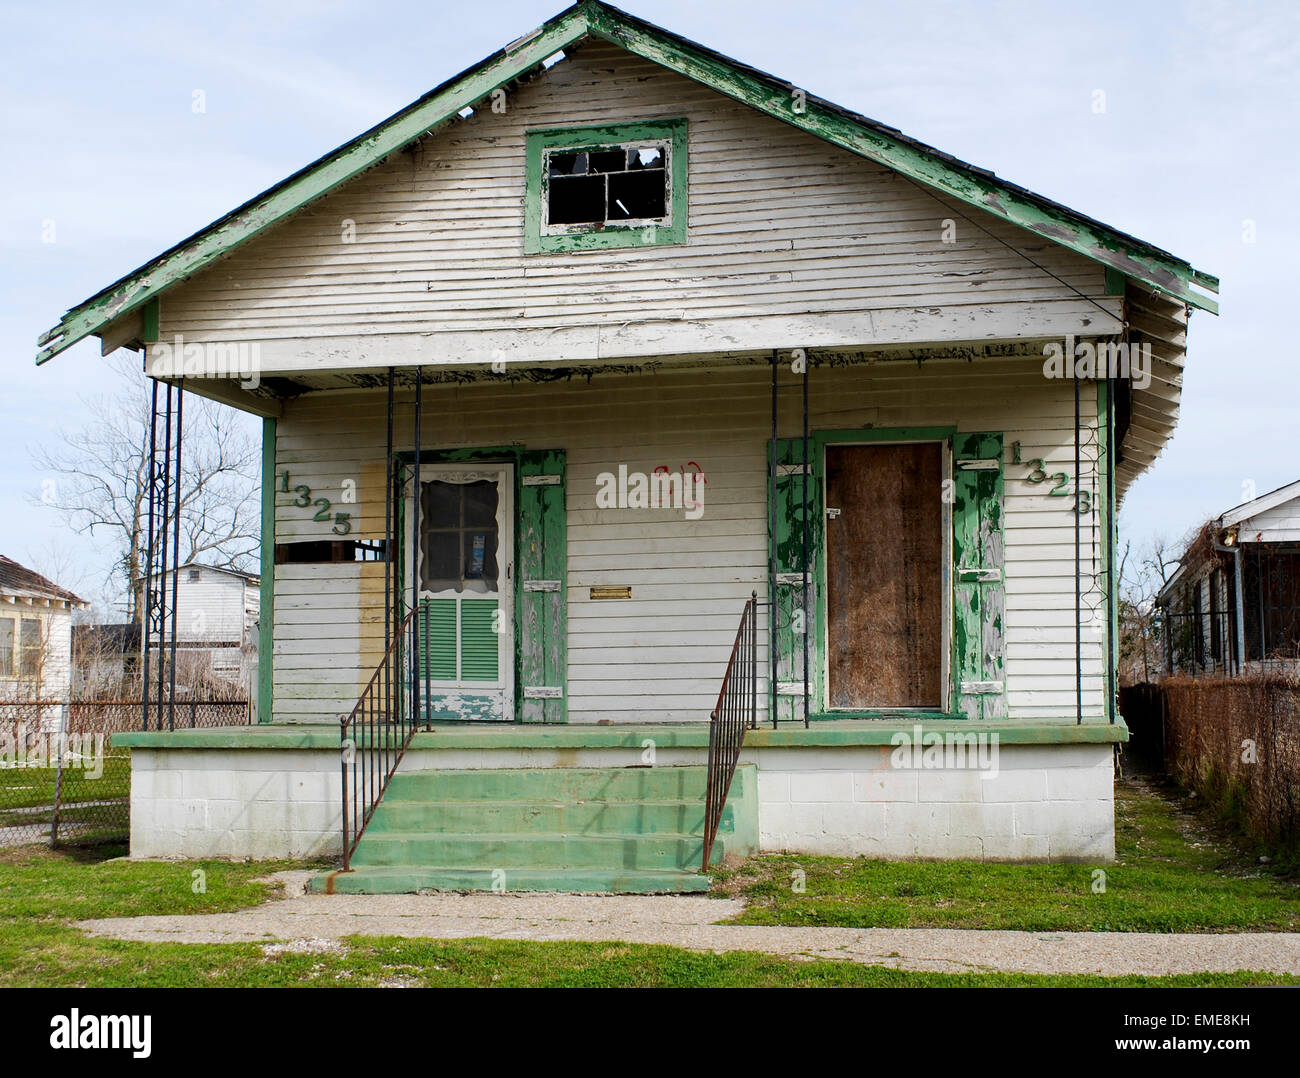 House in the Lower Ninth Ward of New Orleans 5 years after Hurricane Katrina. Stock Photo